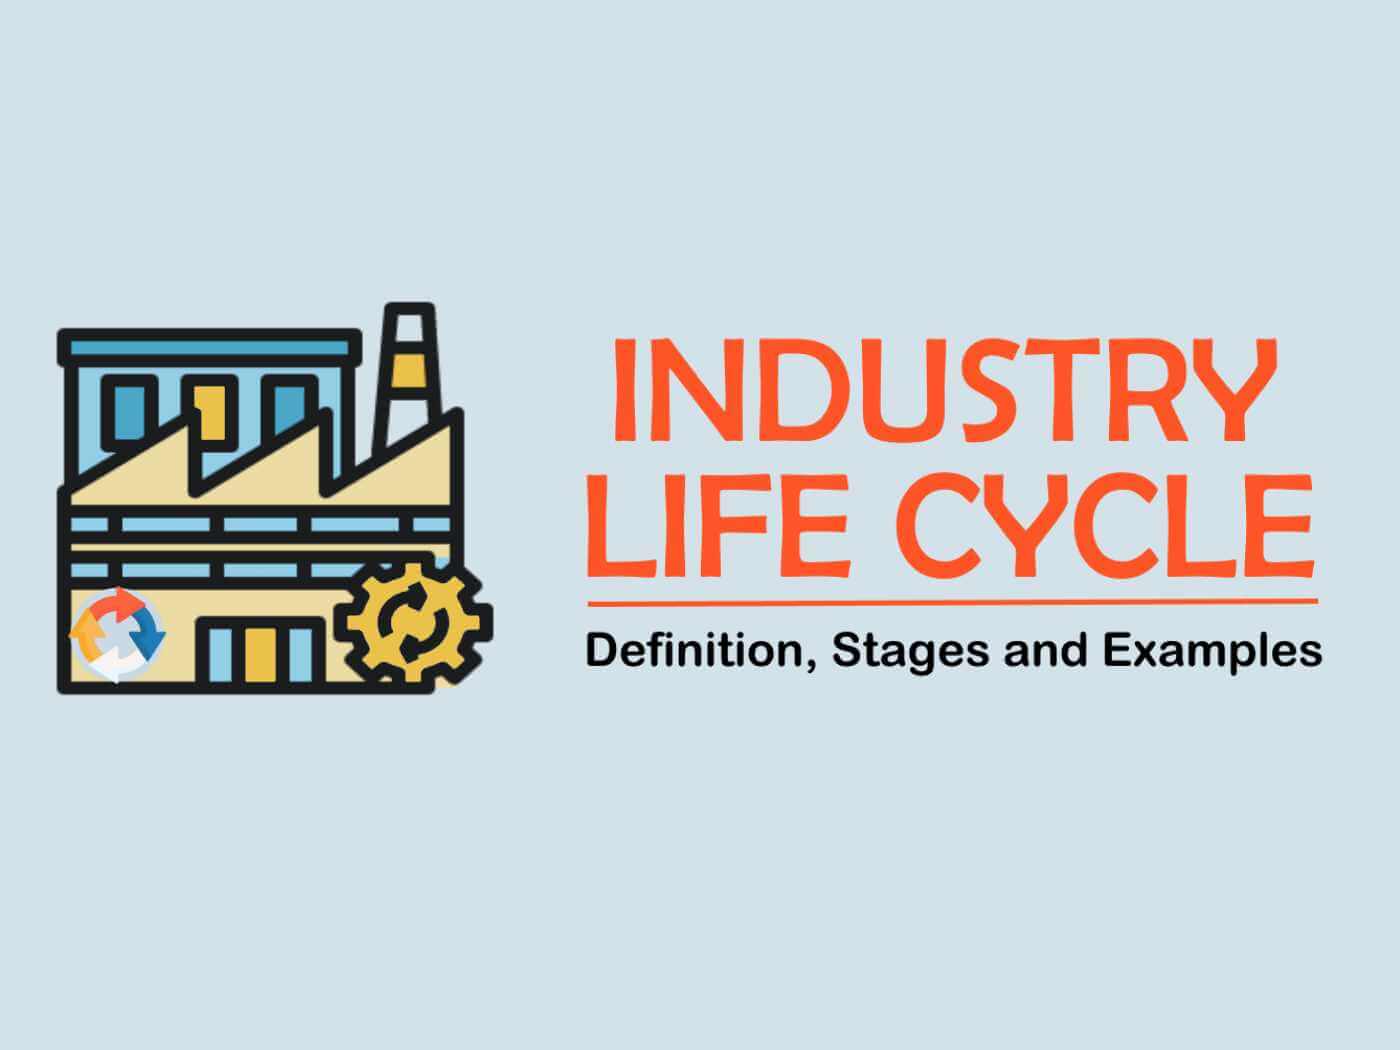 industry life cycle analysis essay